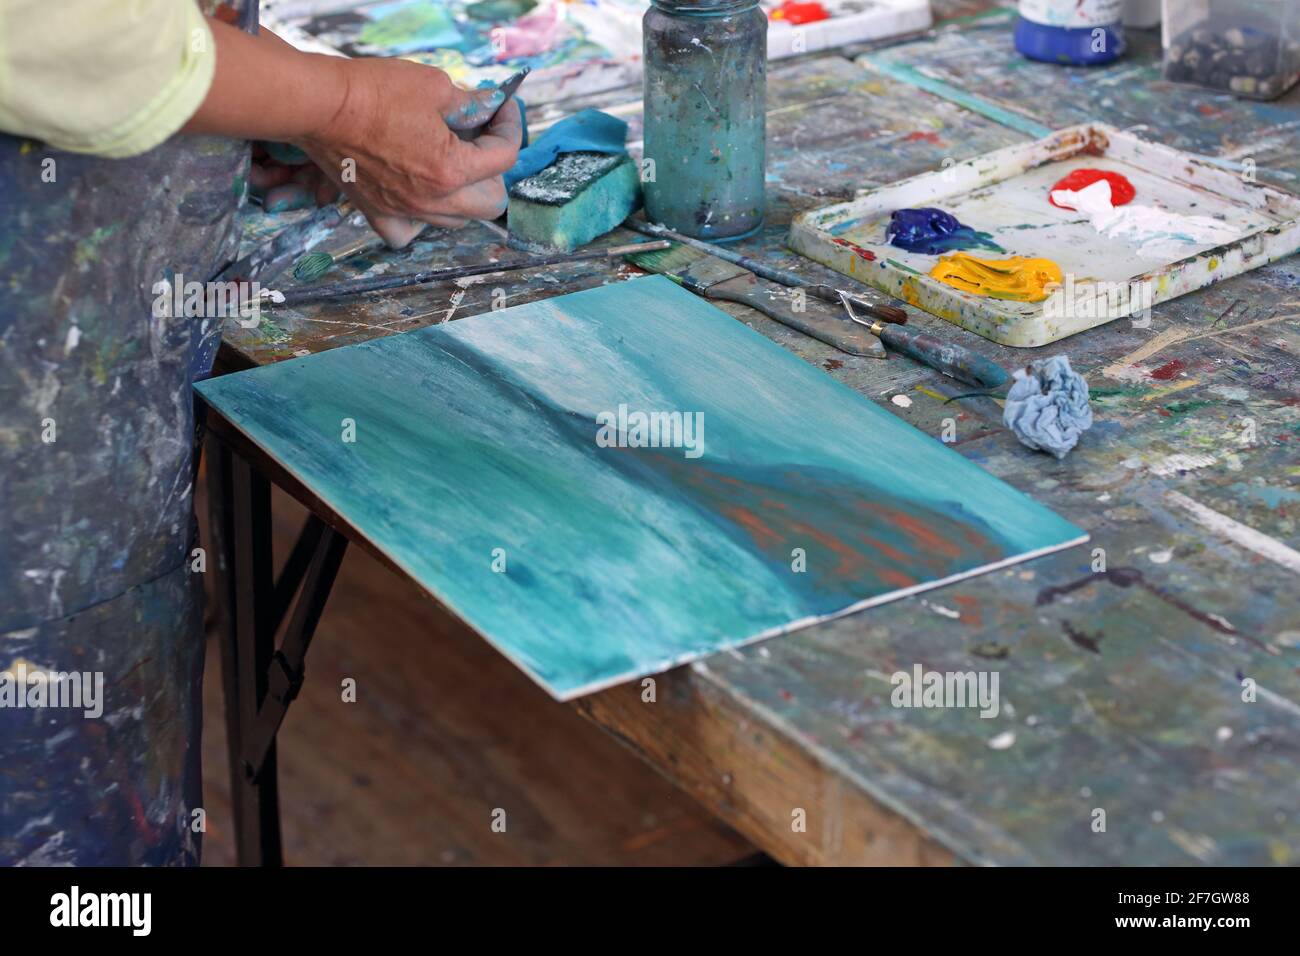 Unrecognizable woman works on a painting. She is using a spong as she paints on a canvas in St Ives ,Cornwall ,England Stock Photo